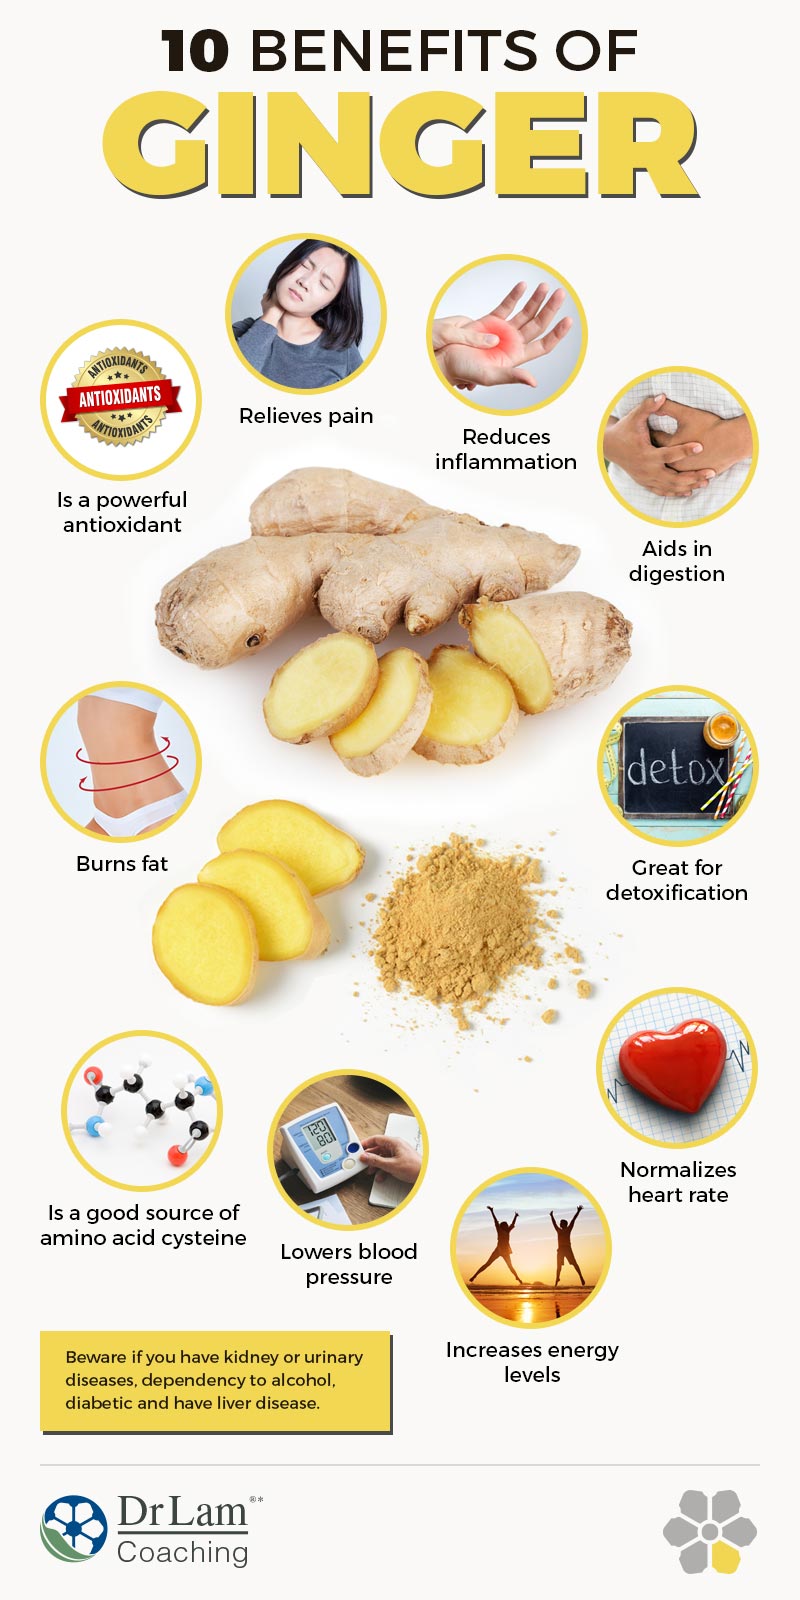 Check out this easy to understand infographic about 10 benefits of ginger